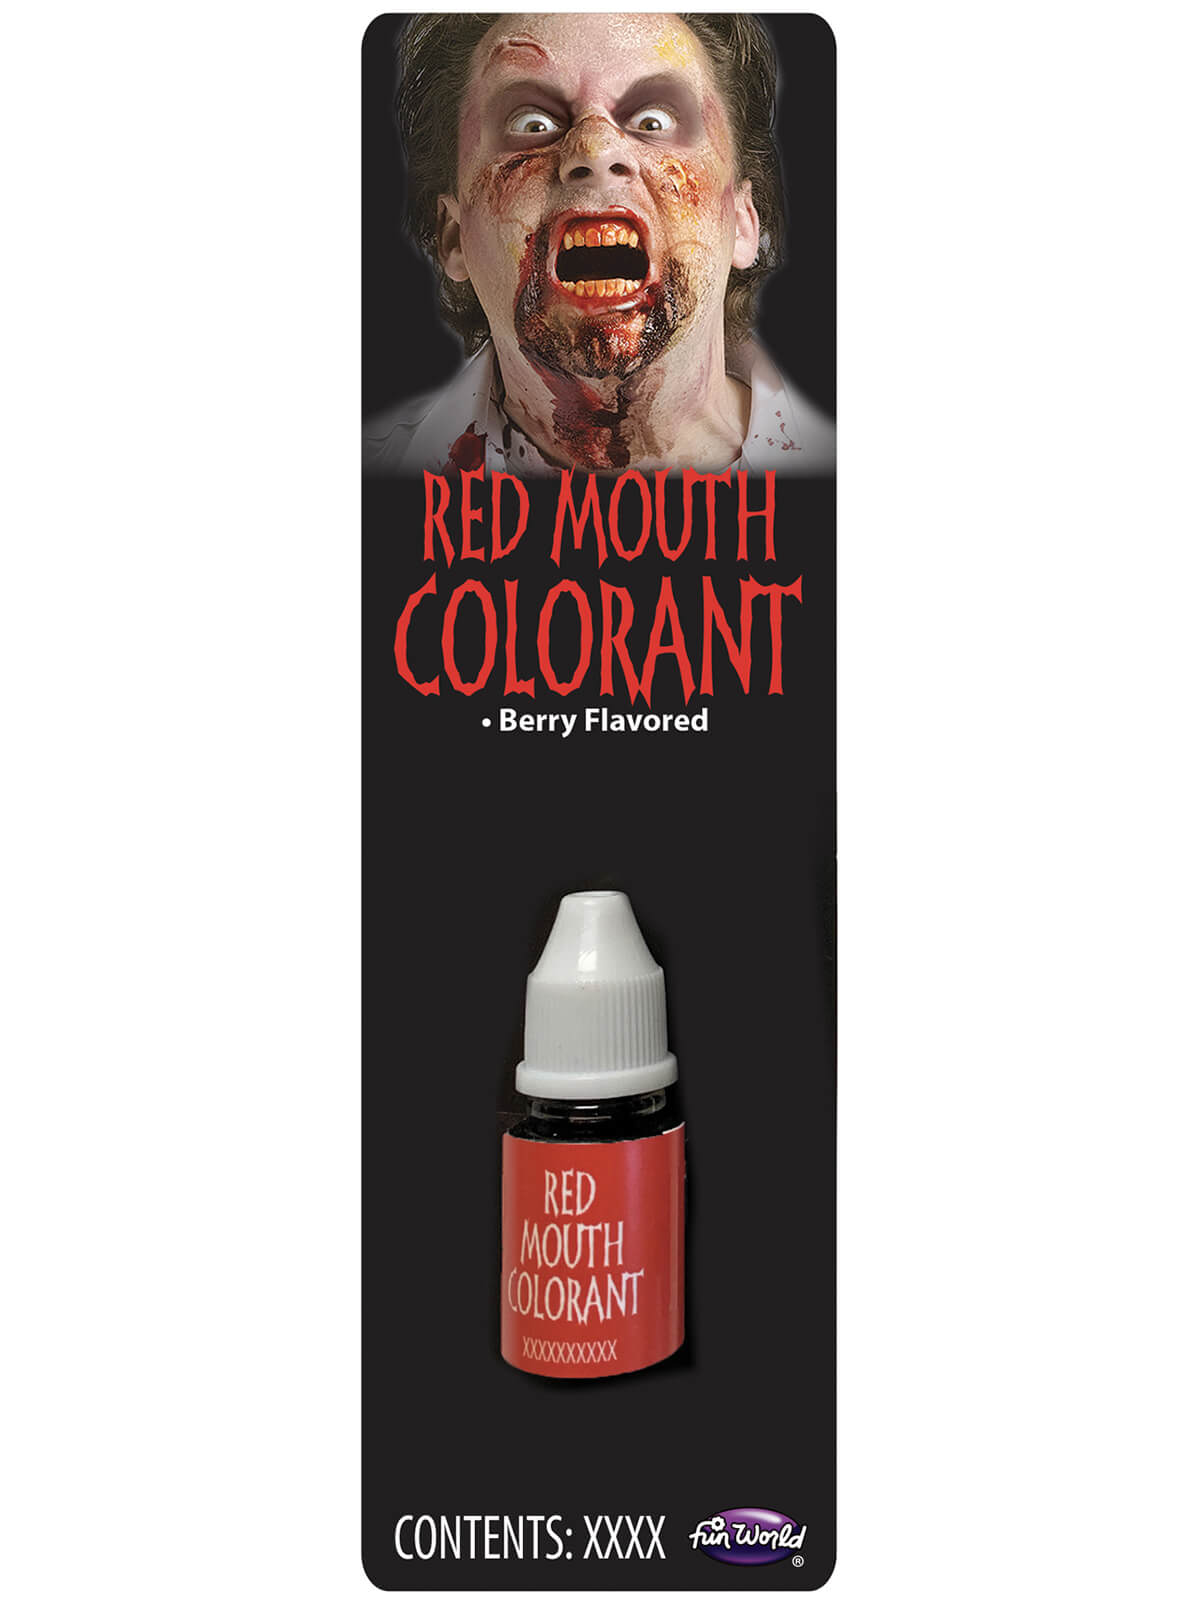 Mouth Colourant Assortment